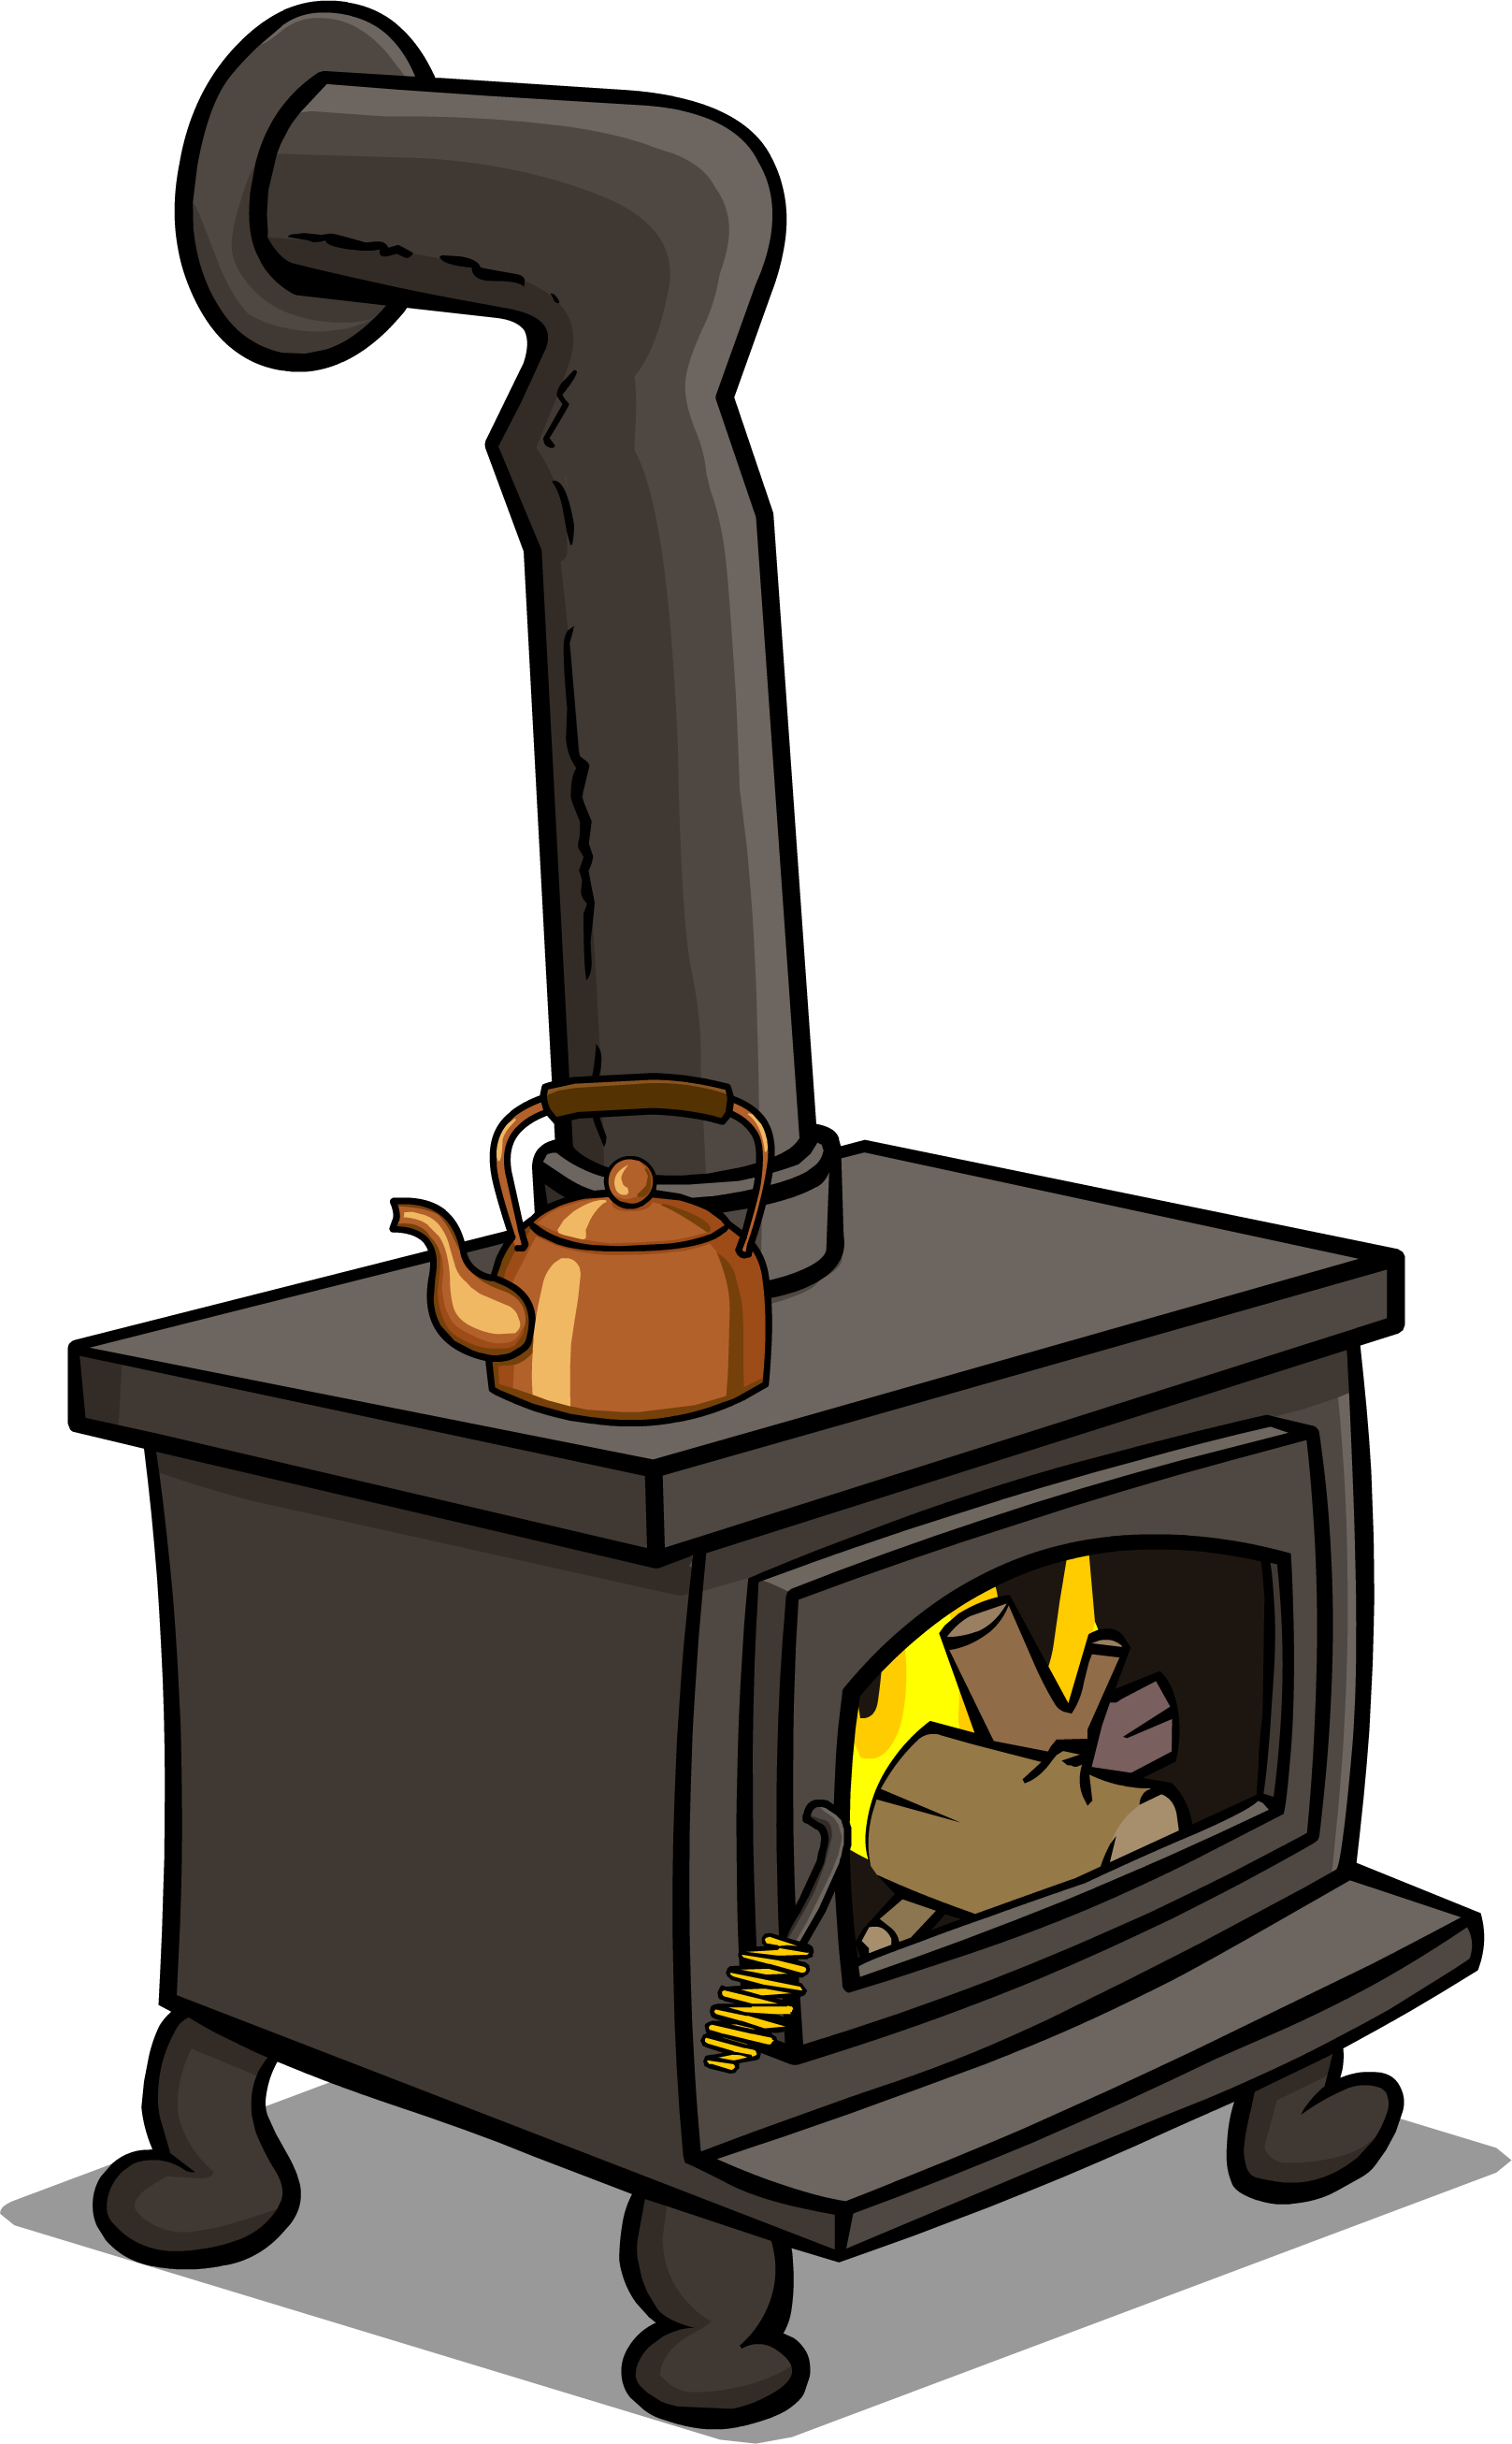 Image - Wood Stove sprite 002.png | Club Penguin Wiki ...